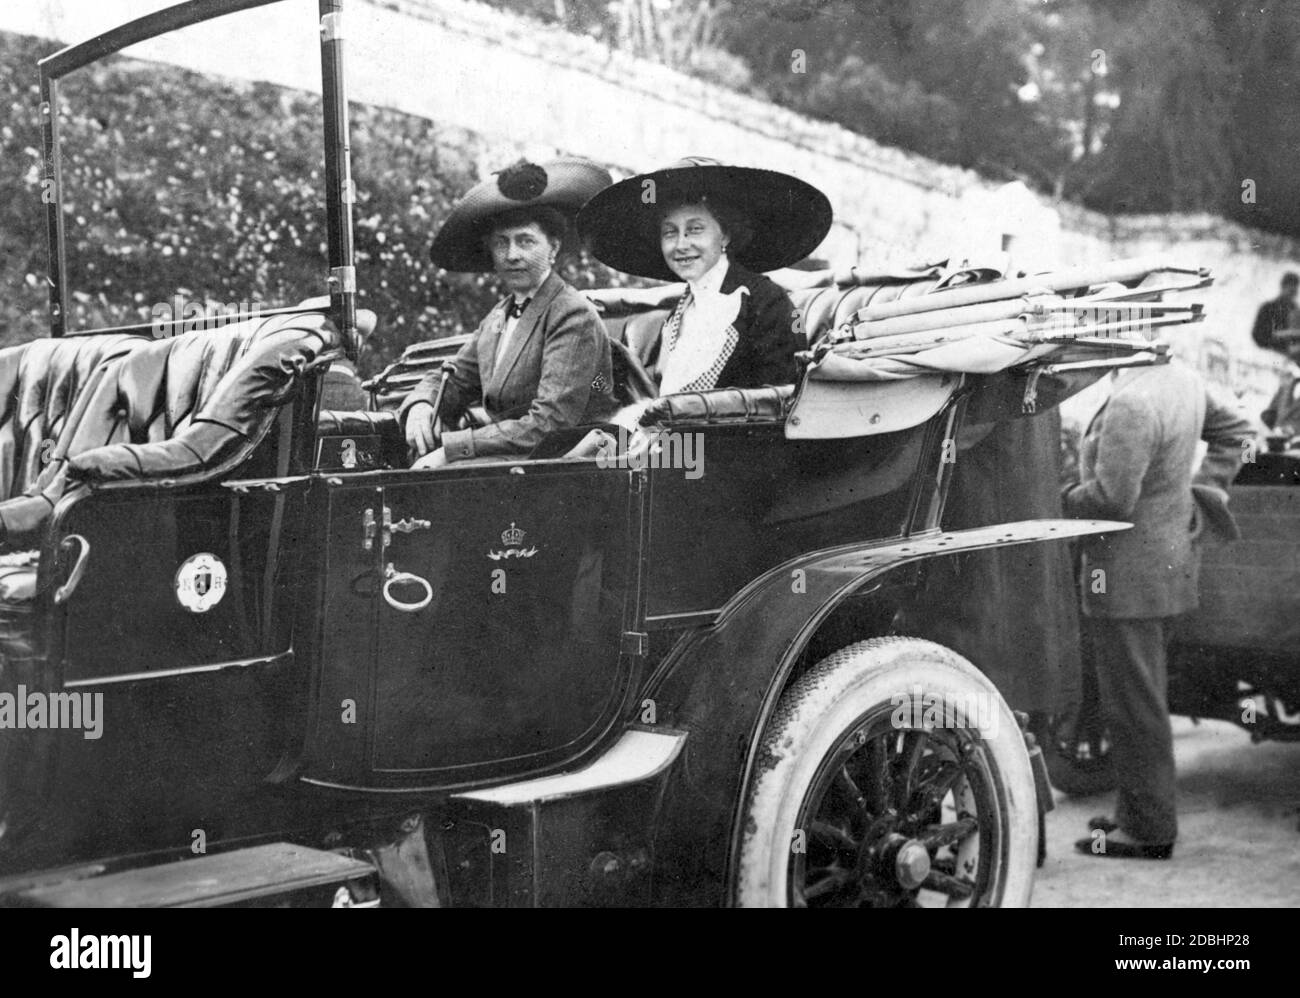 The imperial family travelled to Corfu in 1912. In the picture, Princess Victoria Louise of Prussia (right) is sitting in a car with her aunt, Crown Princess Sophie of Greece (left, nee Prussia, later Queen of Greece) just before an exit. The coat of arms of the Kaiserlichen Automobil-Club (Imperial Automobile Club) hangs on the front door of the car. Stock Photo